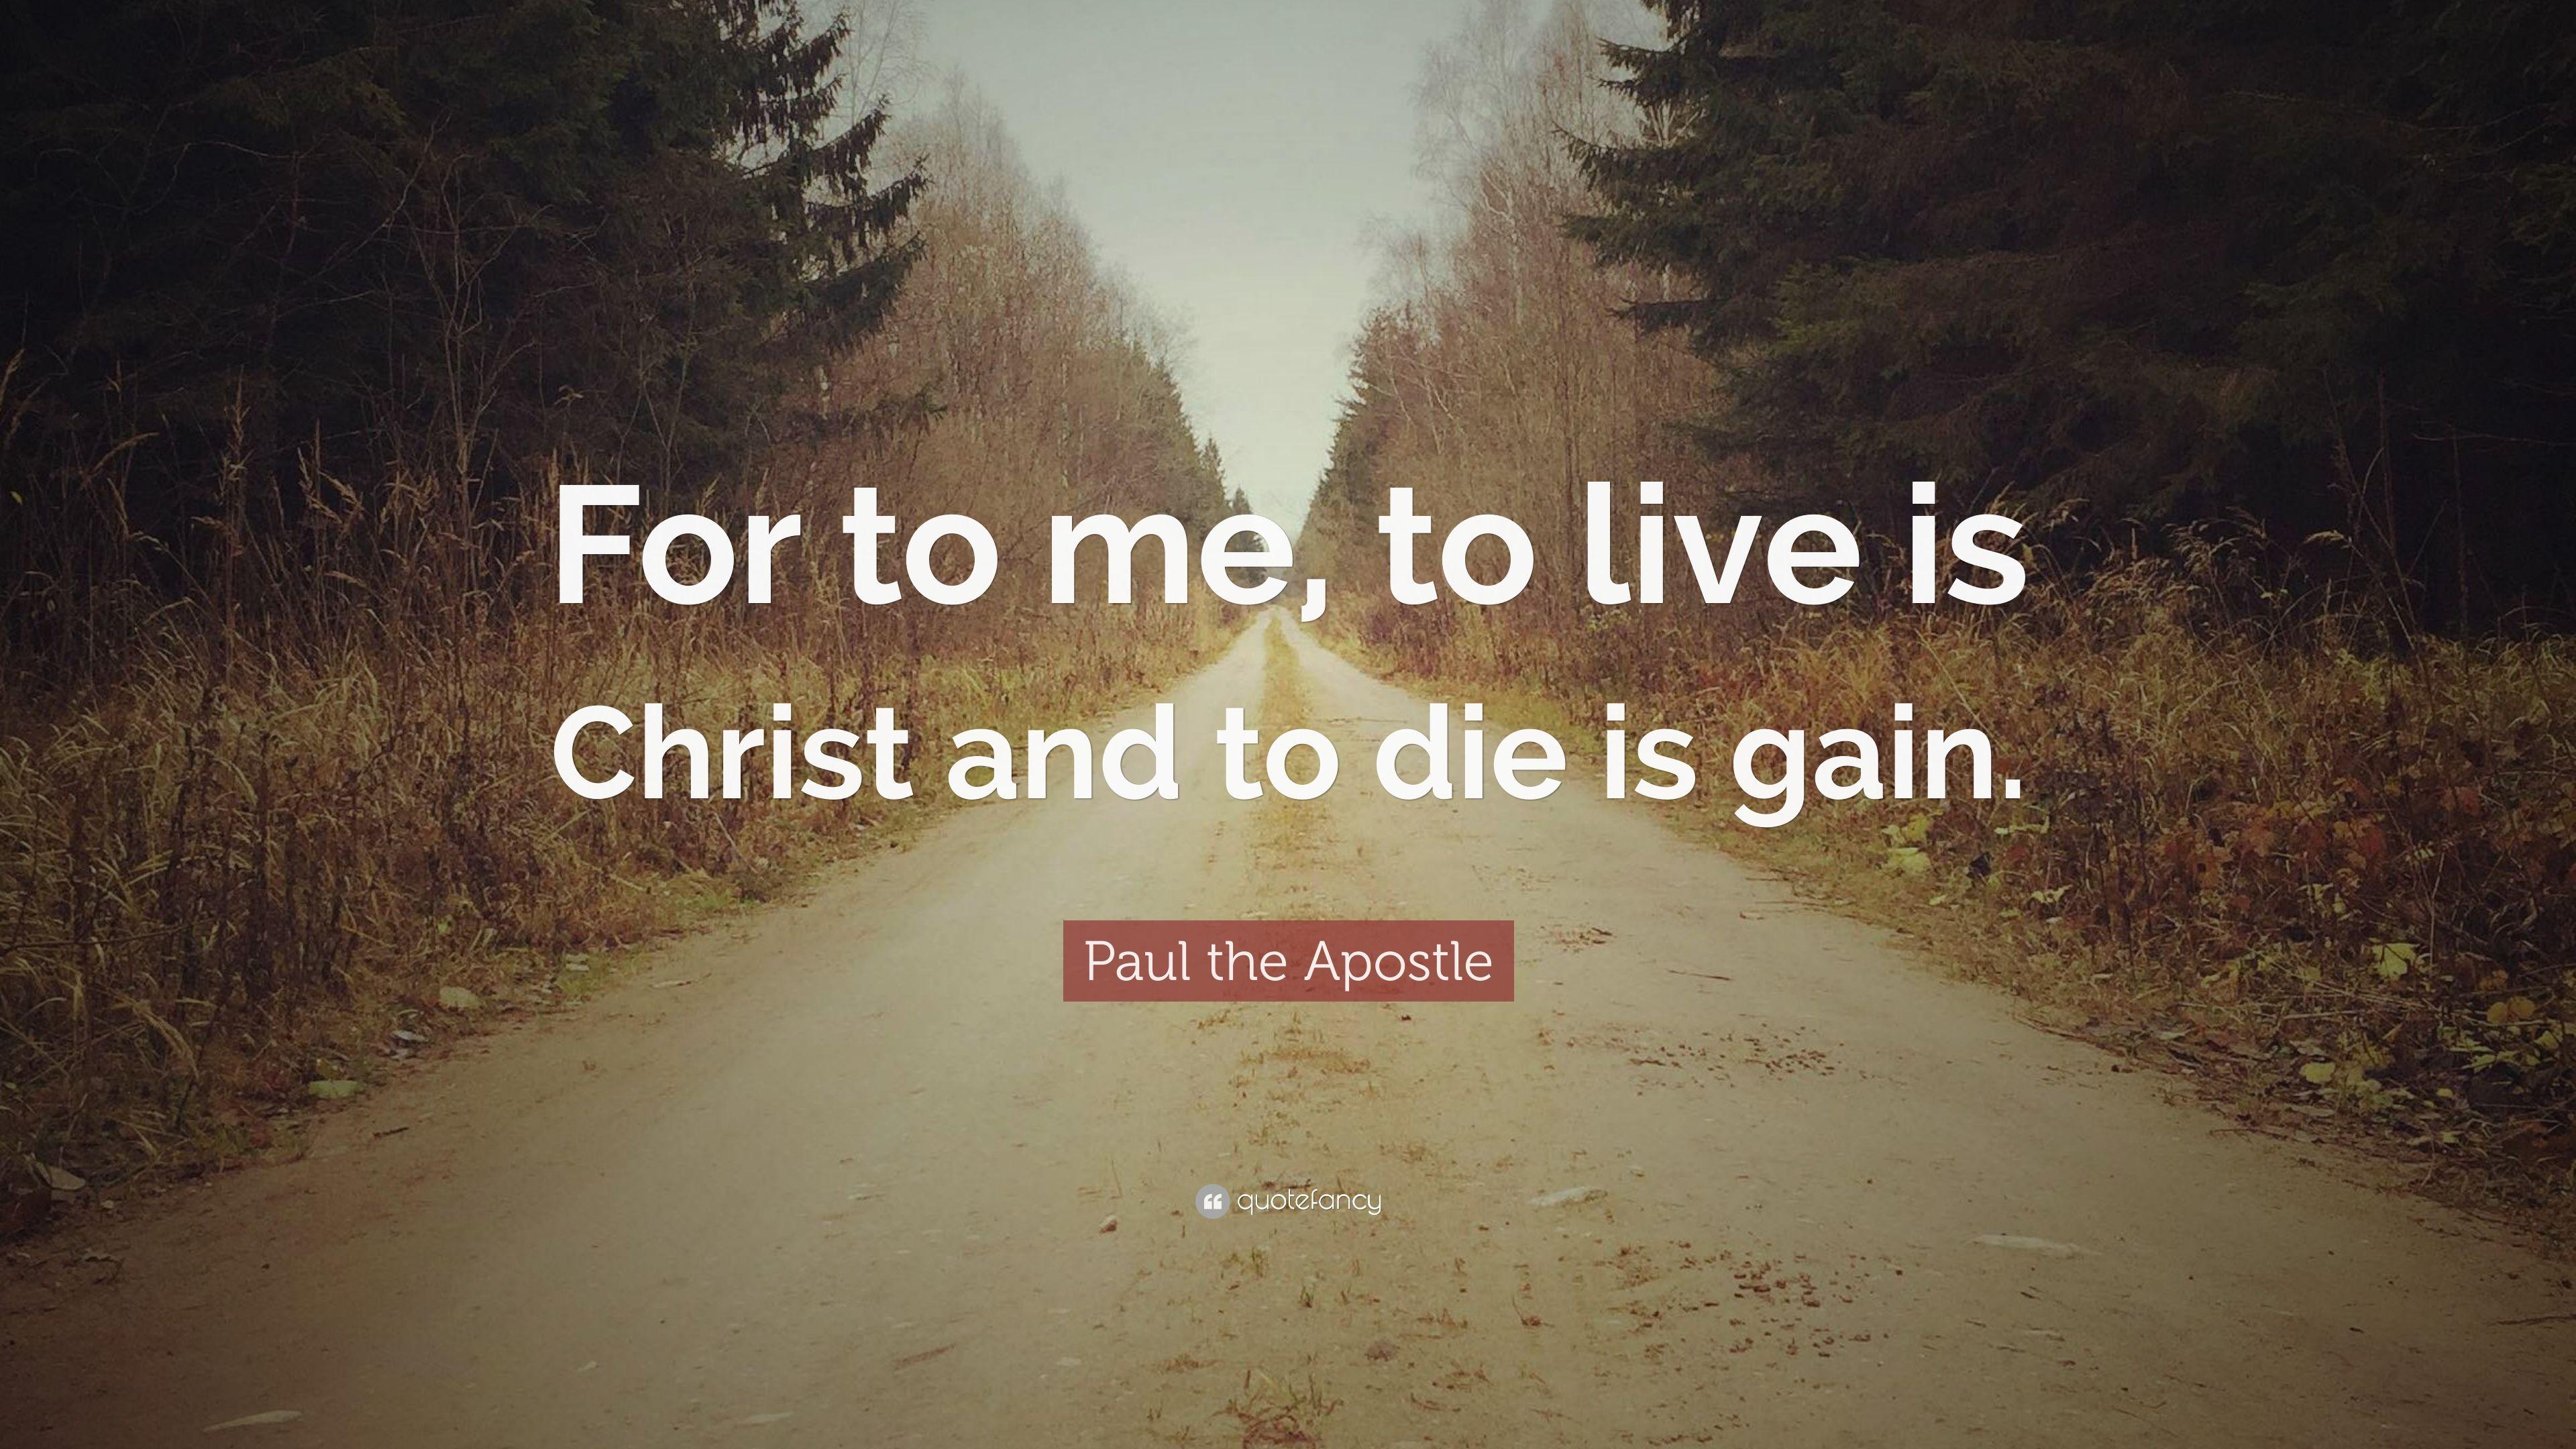 Paul the Apostle Quote: “For to me, to live is Christ and to die